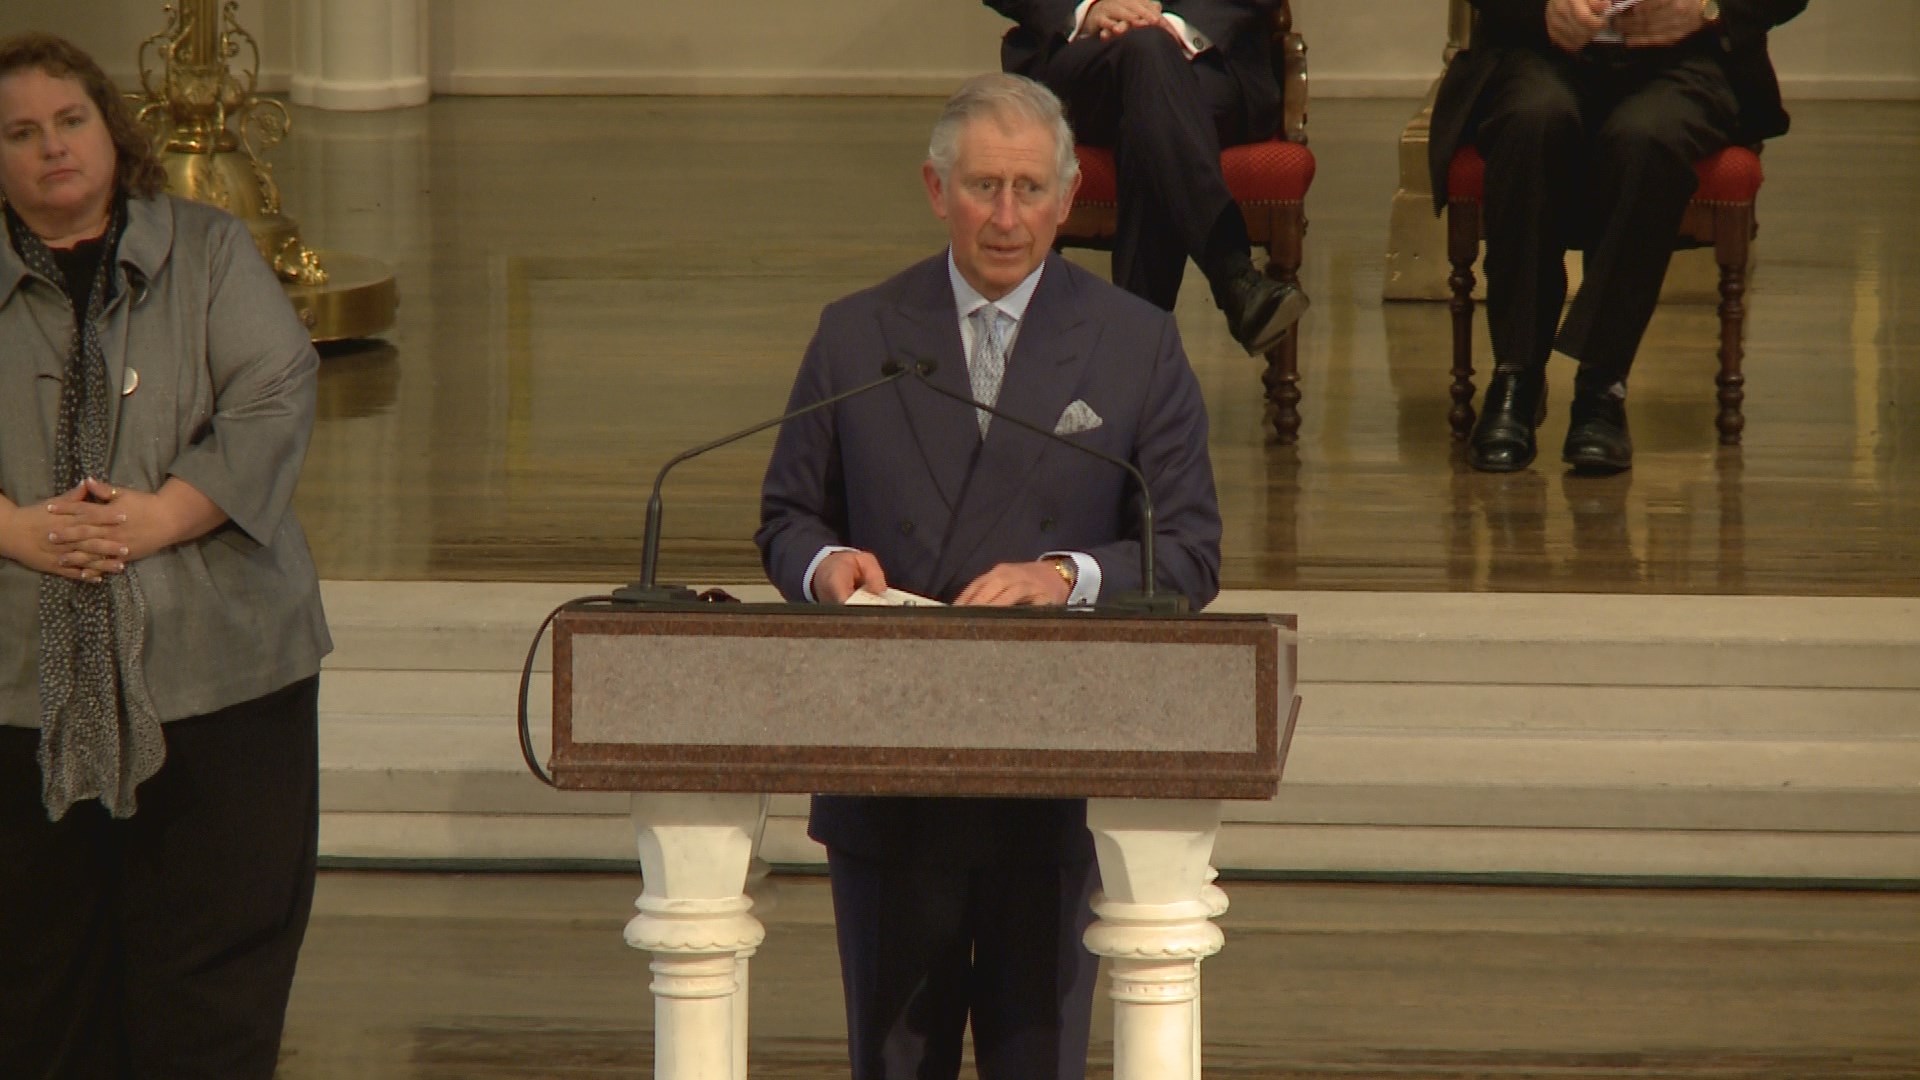 WATCH Prince Charles' full speech from the Cathedral of the Assumption